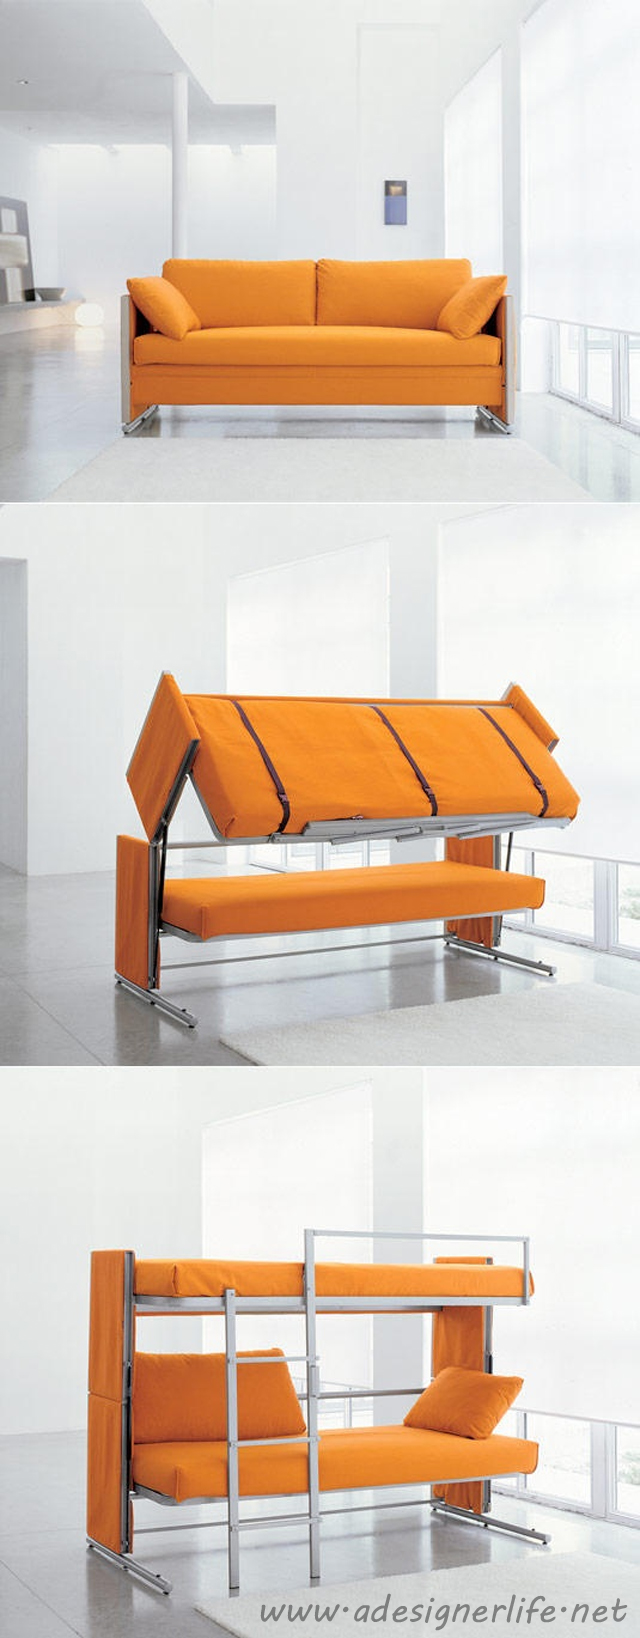 Resource Furniture Convertible Sofa to Bunk Bed - AWESOME! #product_design